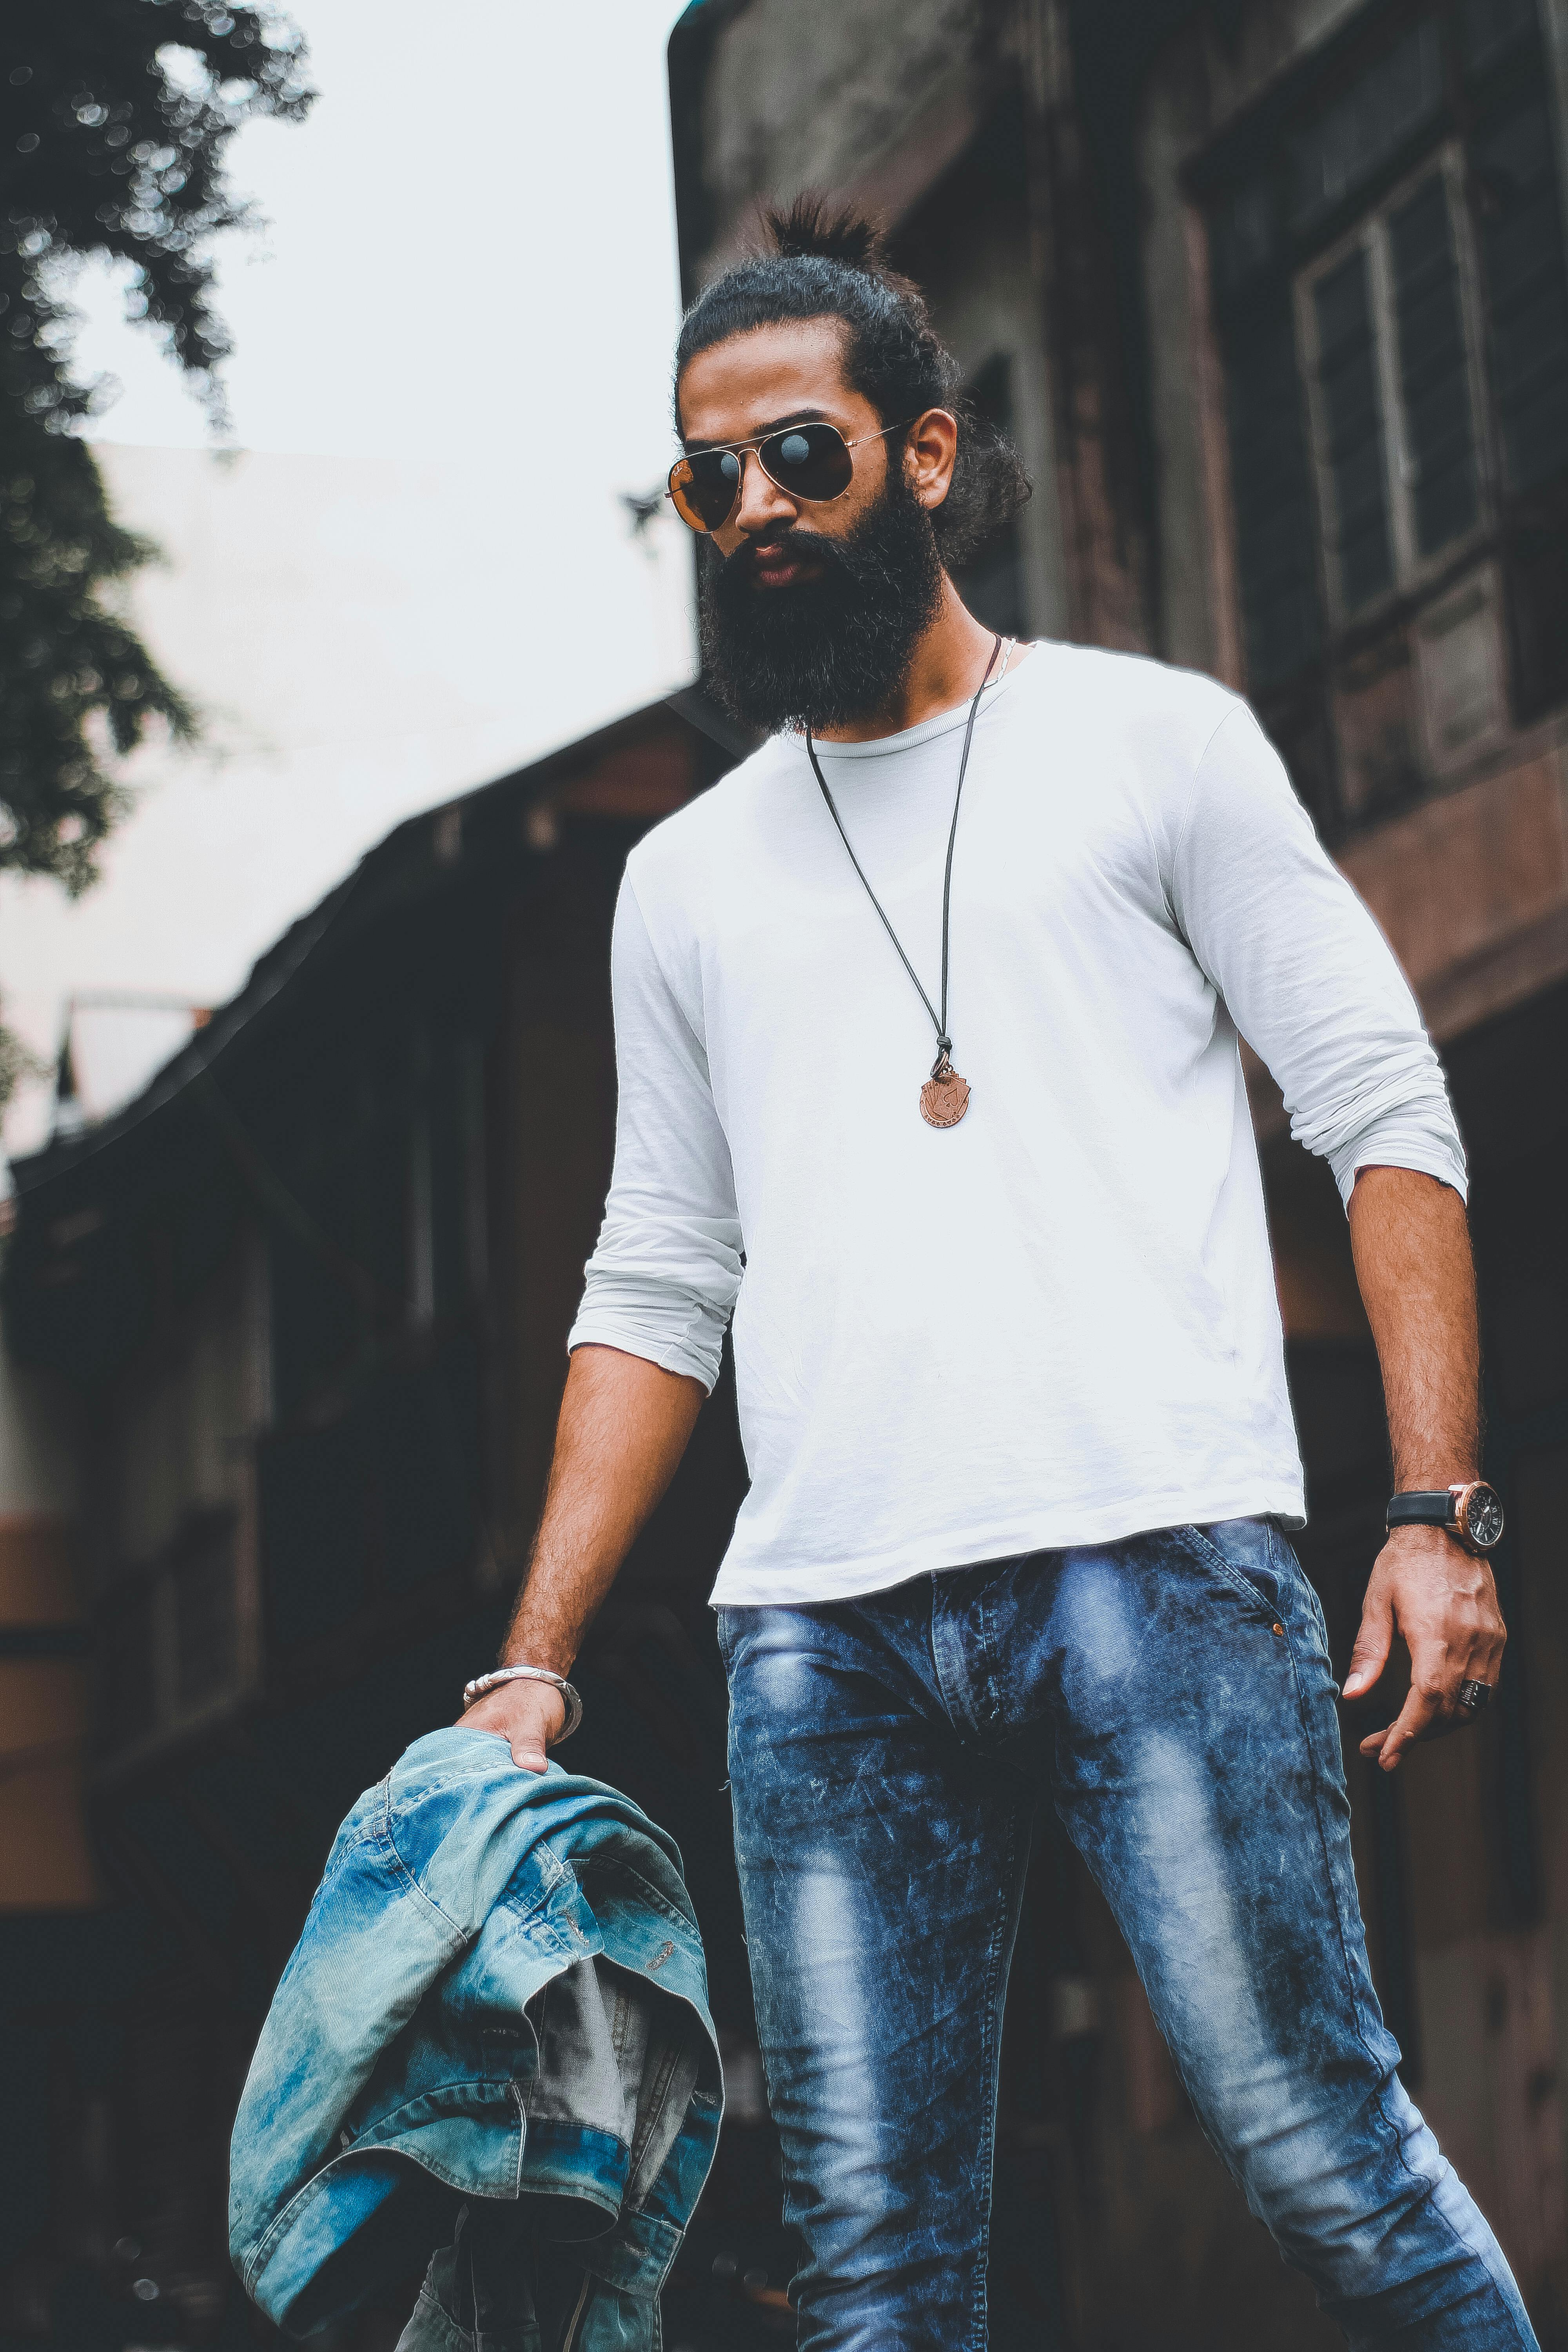 Free Images : man, white, male, portrait, young, spring, fashion, clothing,  hairstyle, posing, cool, sunglasses, glasses, pose, style, attractive,  elegance, glamour, stylish, sensual, photo shoot, facial hair 4384x3328 - -  1284427 - Free stock photos ...